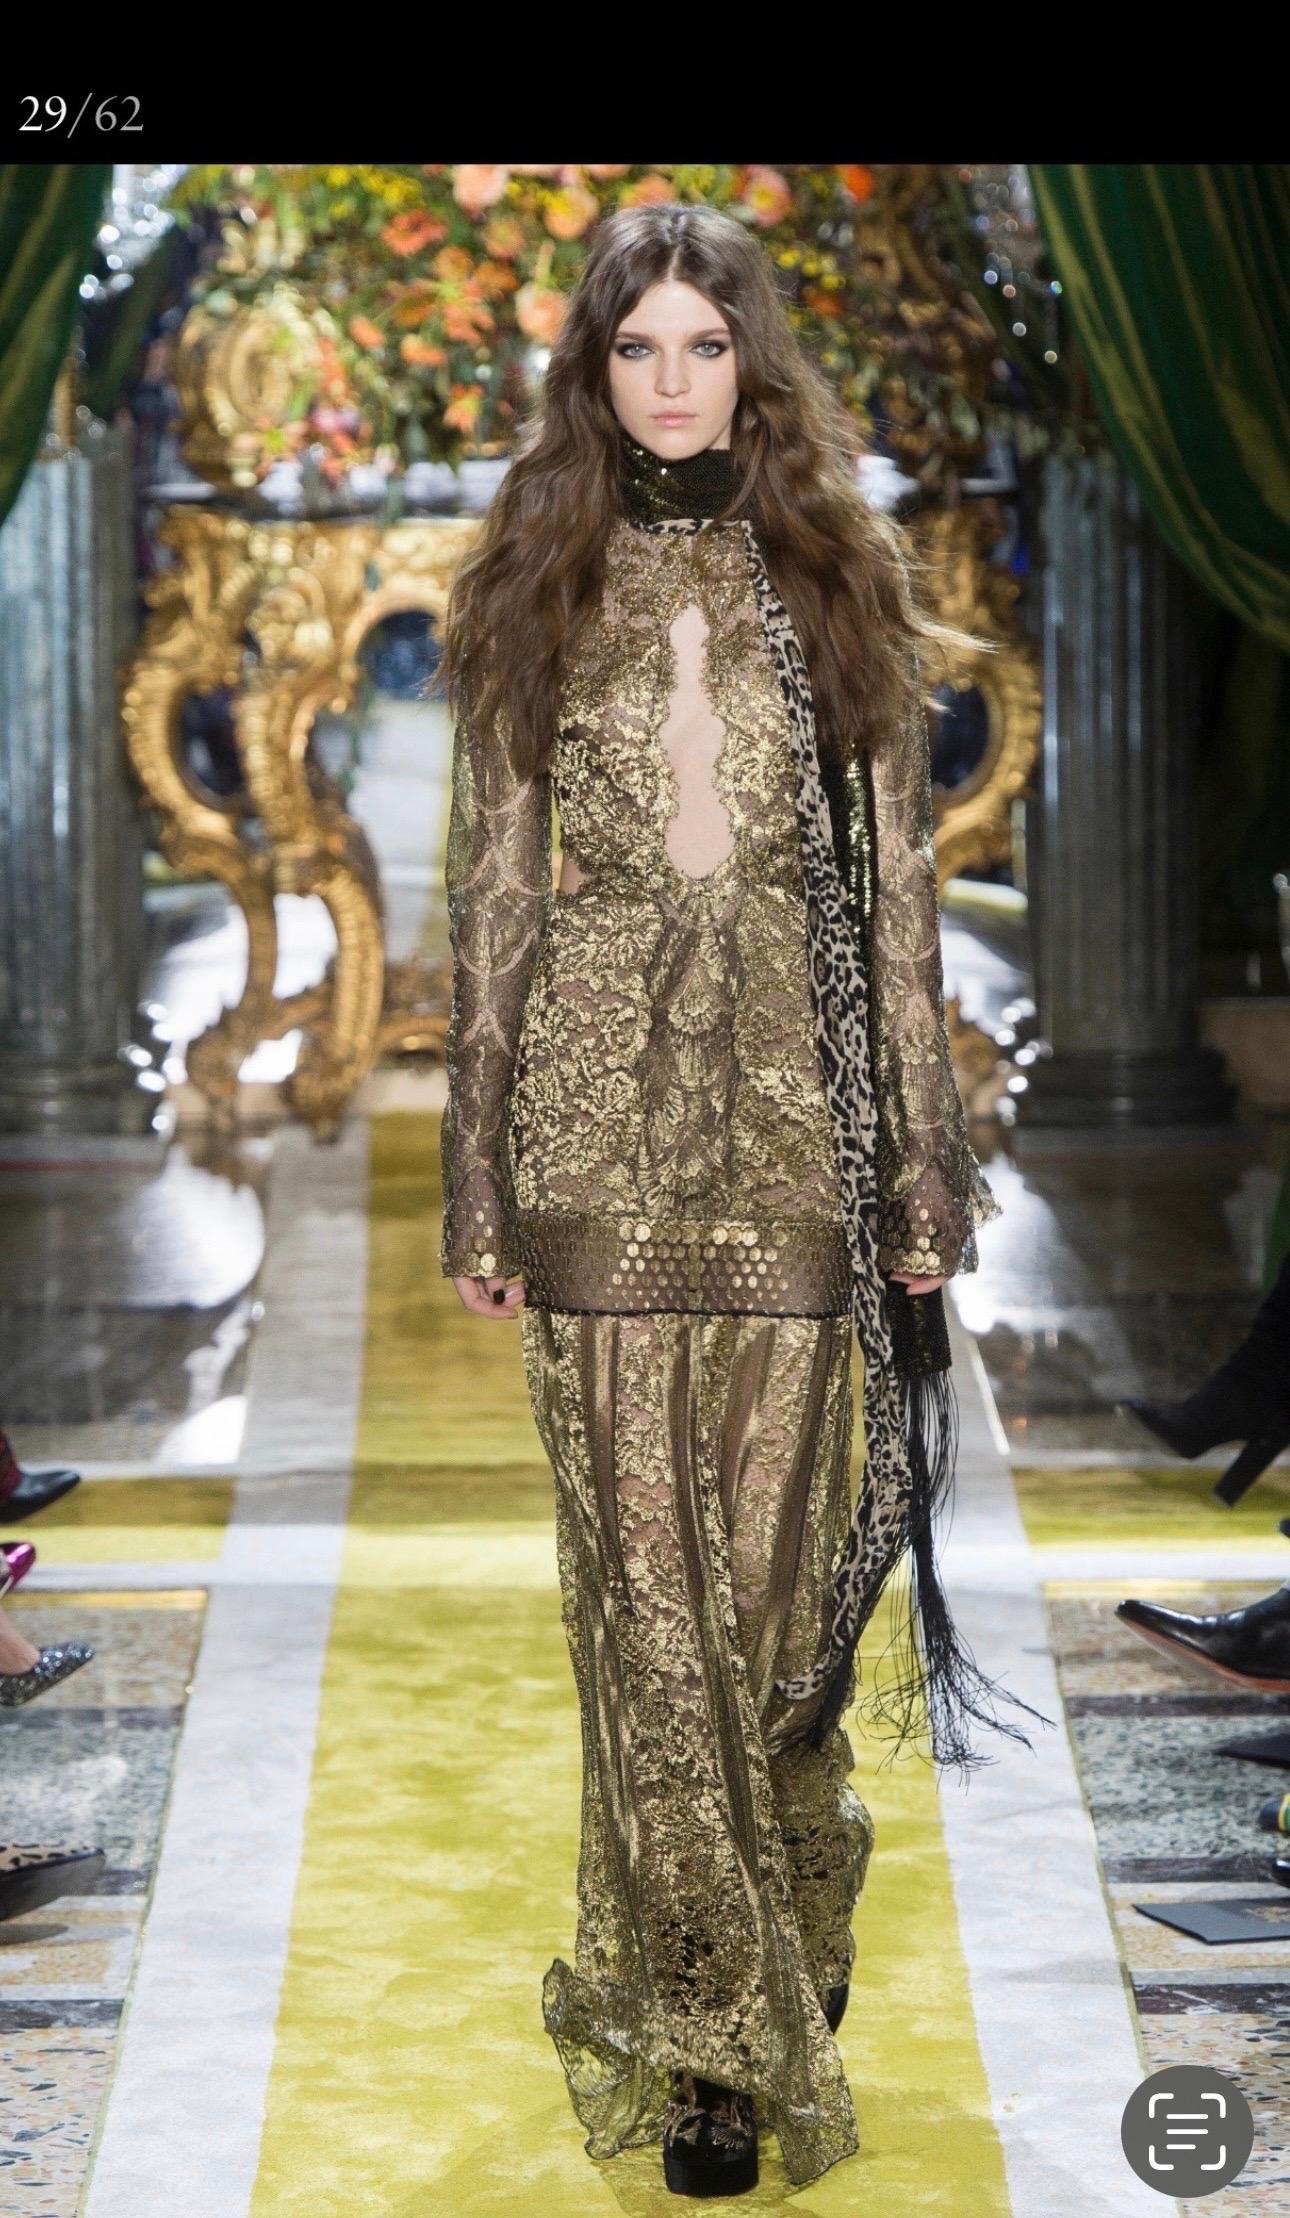 Roberto Cavalli F/W 2016 Runway Gold Sheer Lace Evening Dress Gown For Sale 3